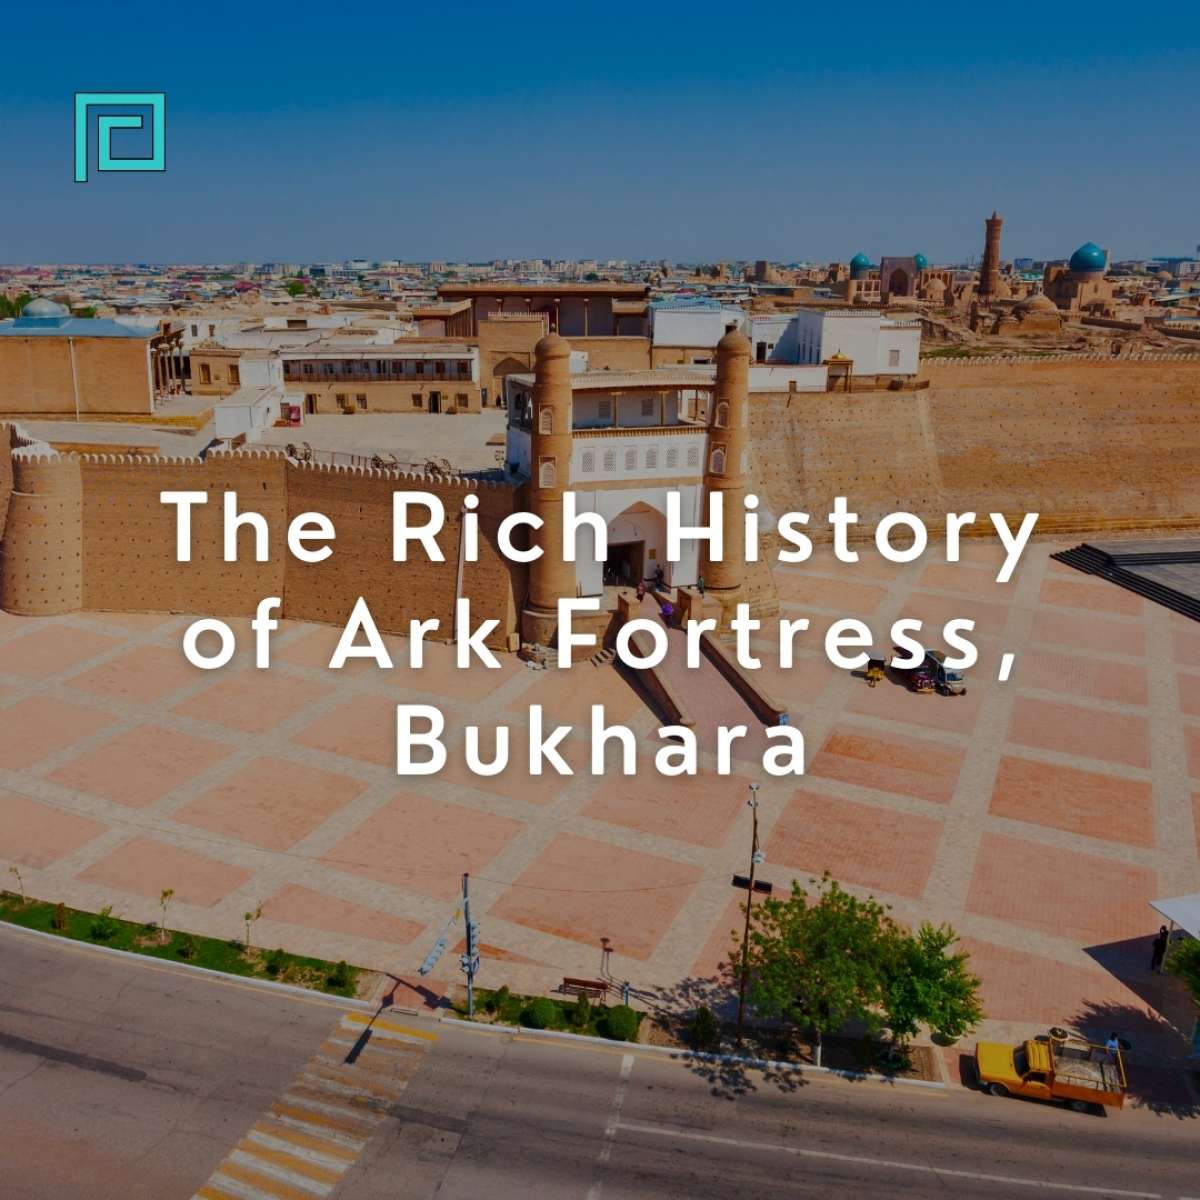 The Rich History of Ark Fortress, Bukhara